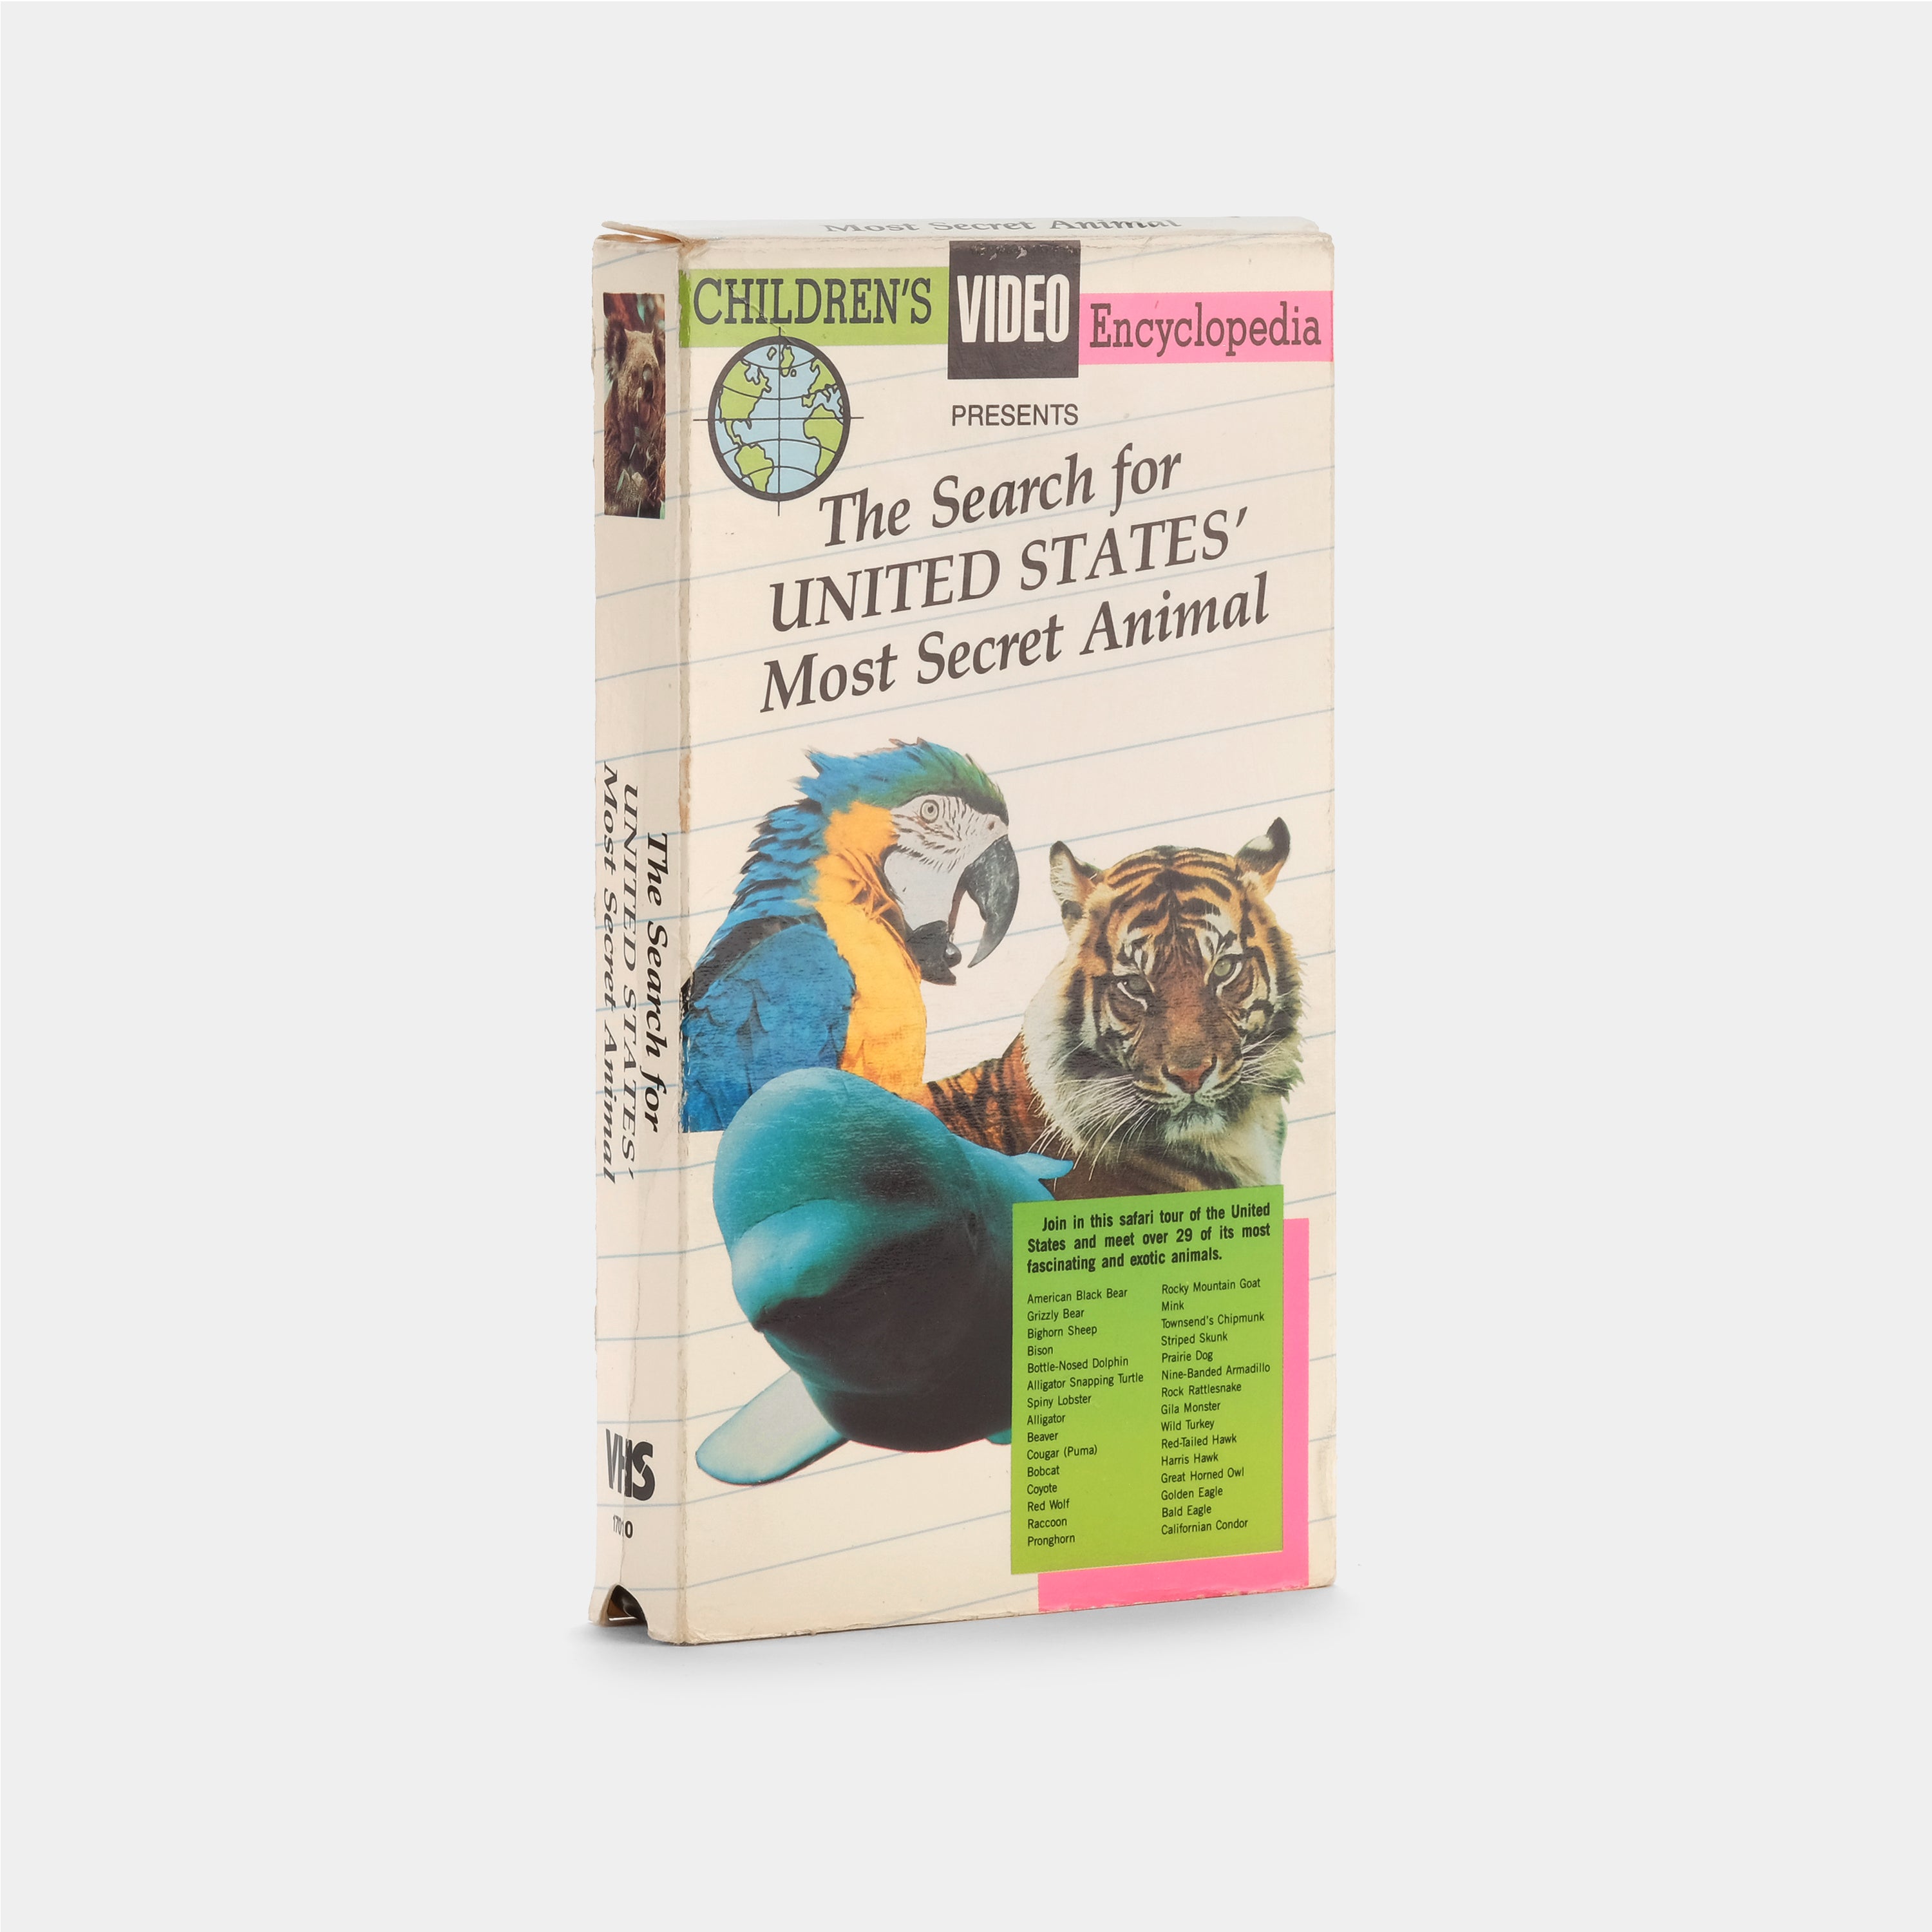 The Search for United States' Most Secret Animal VHS Tape